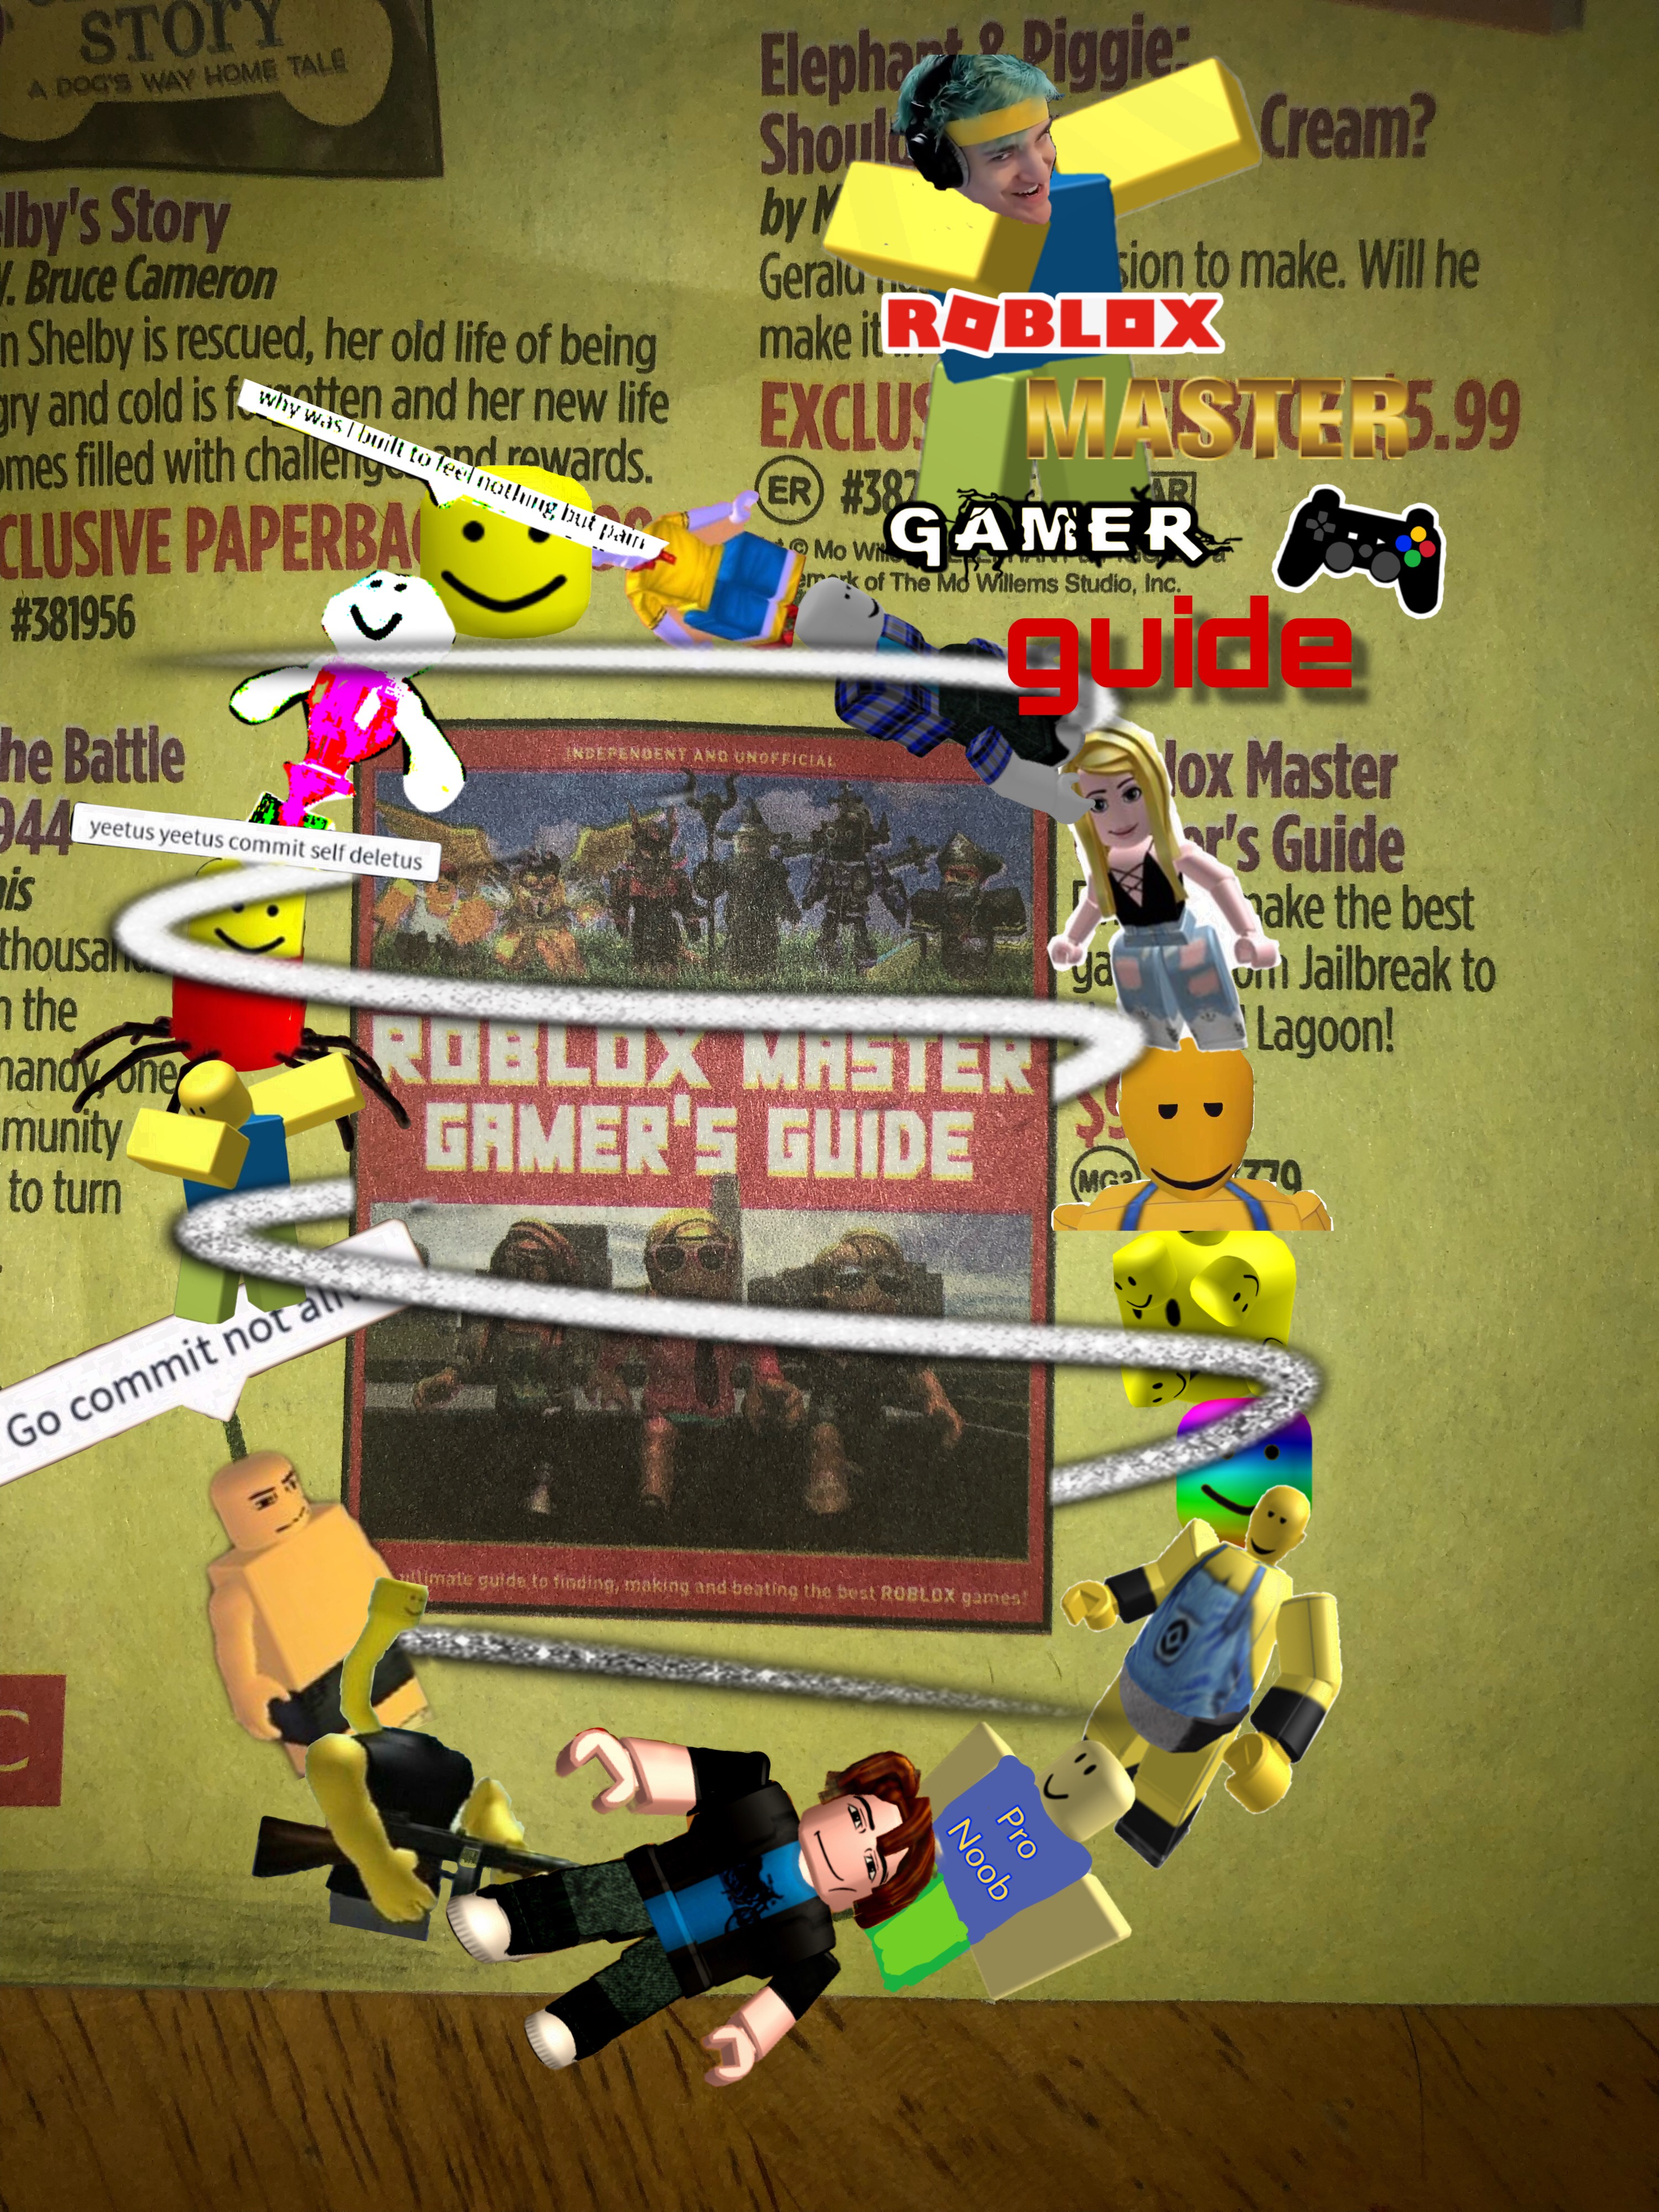 Roblox Robloxmastergamerguide Image By Natalie Carreon